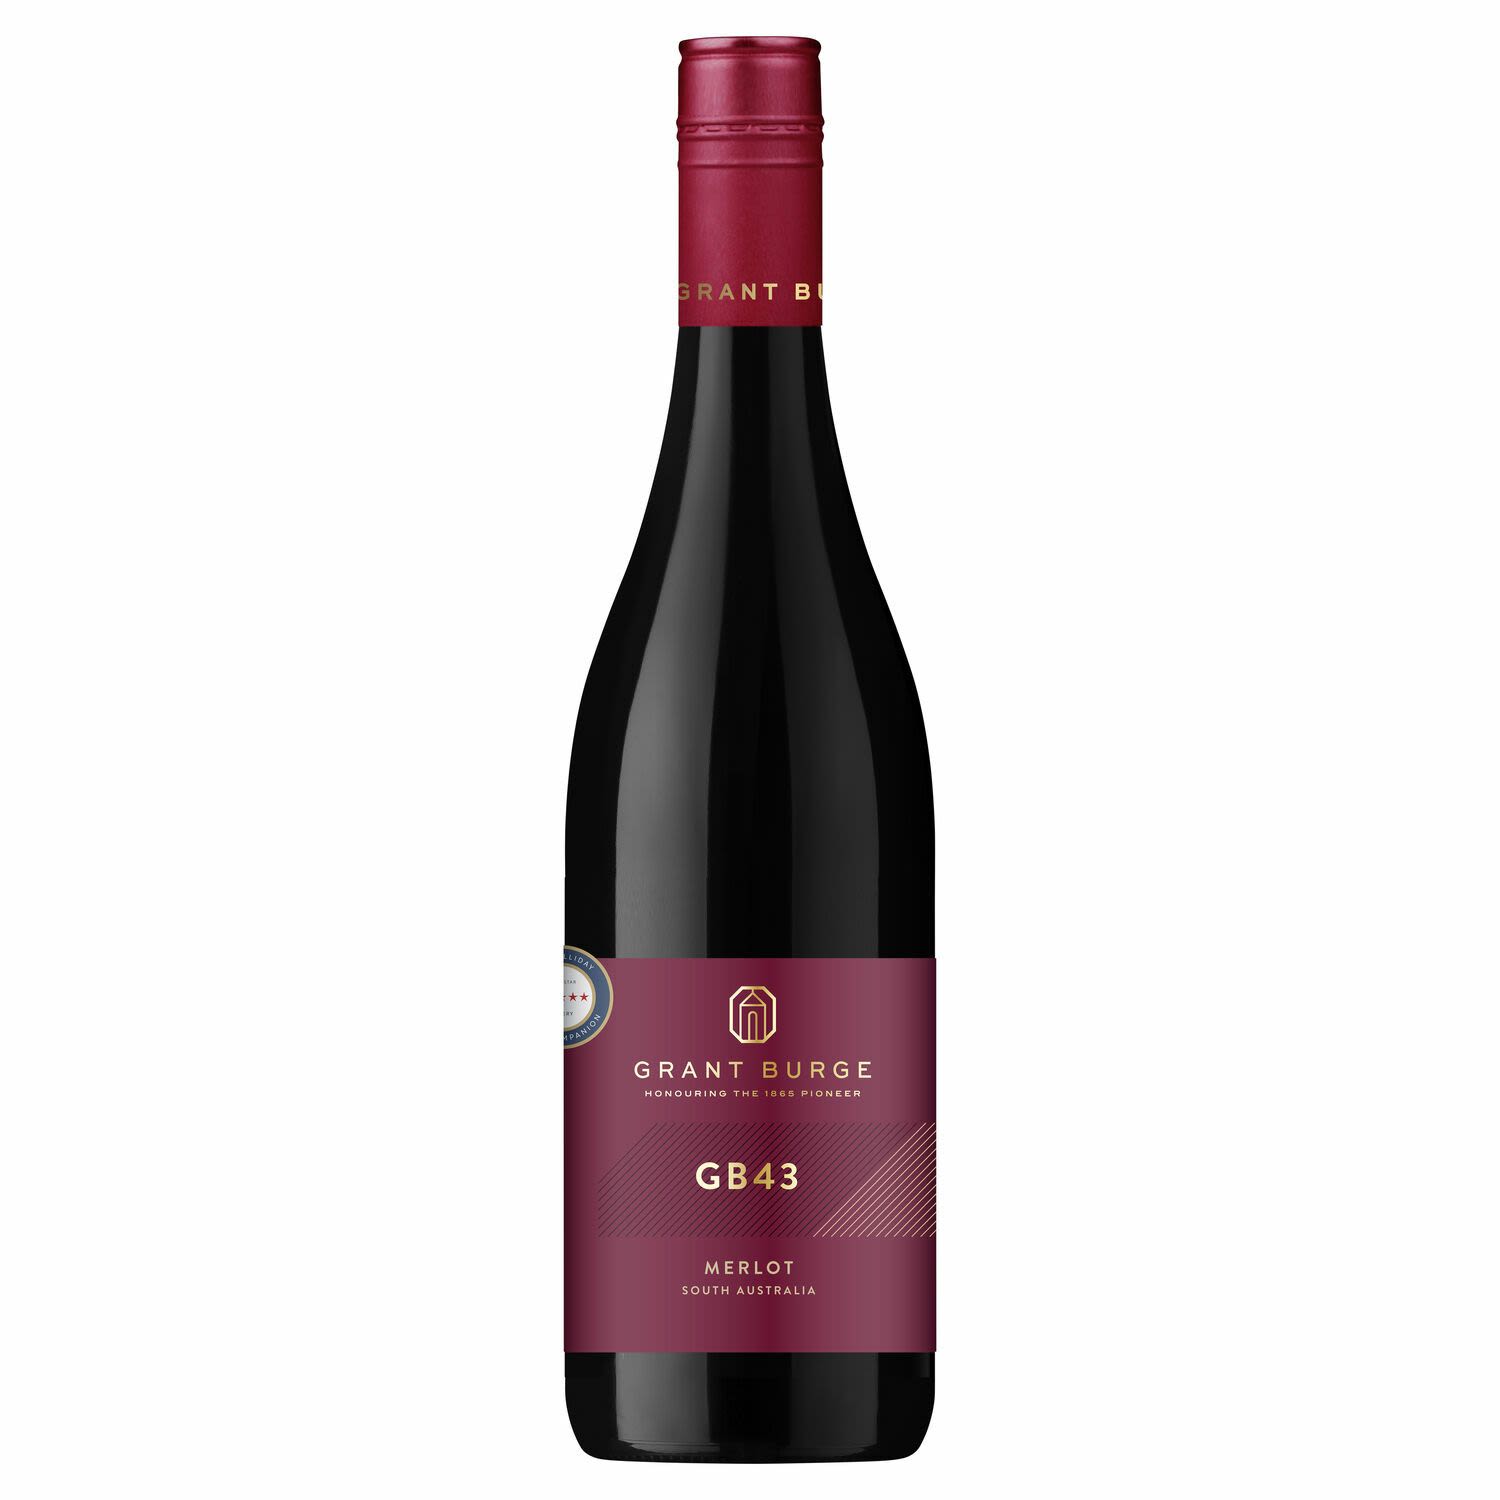 Bright red in colour, this medium bodied wine has plenty of aromas and flavours of blueberry, plum and raspberries with hints of spice and vanilla. The perfectly balanced palate is soft, subtle and juicy.<br /> <br />Alcohol Volume: 13.70%<br /><br />Pack Format: Bottle<br /><br />Standard Drinks: 8.3</br /><br />Pack Type: Bottle<br /><br />Country of Origin: Australia<br /><br />Region: South Australia<br /><br />Vintage: '2018<br />